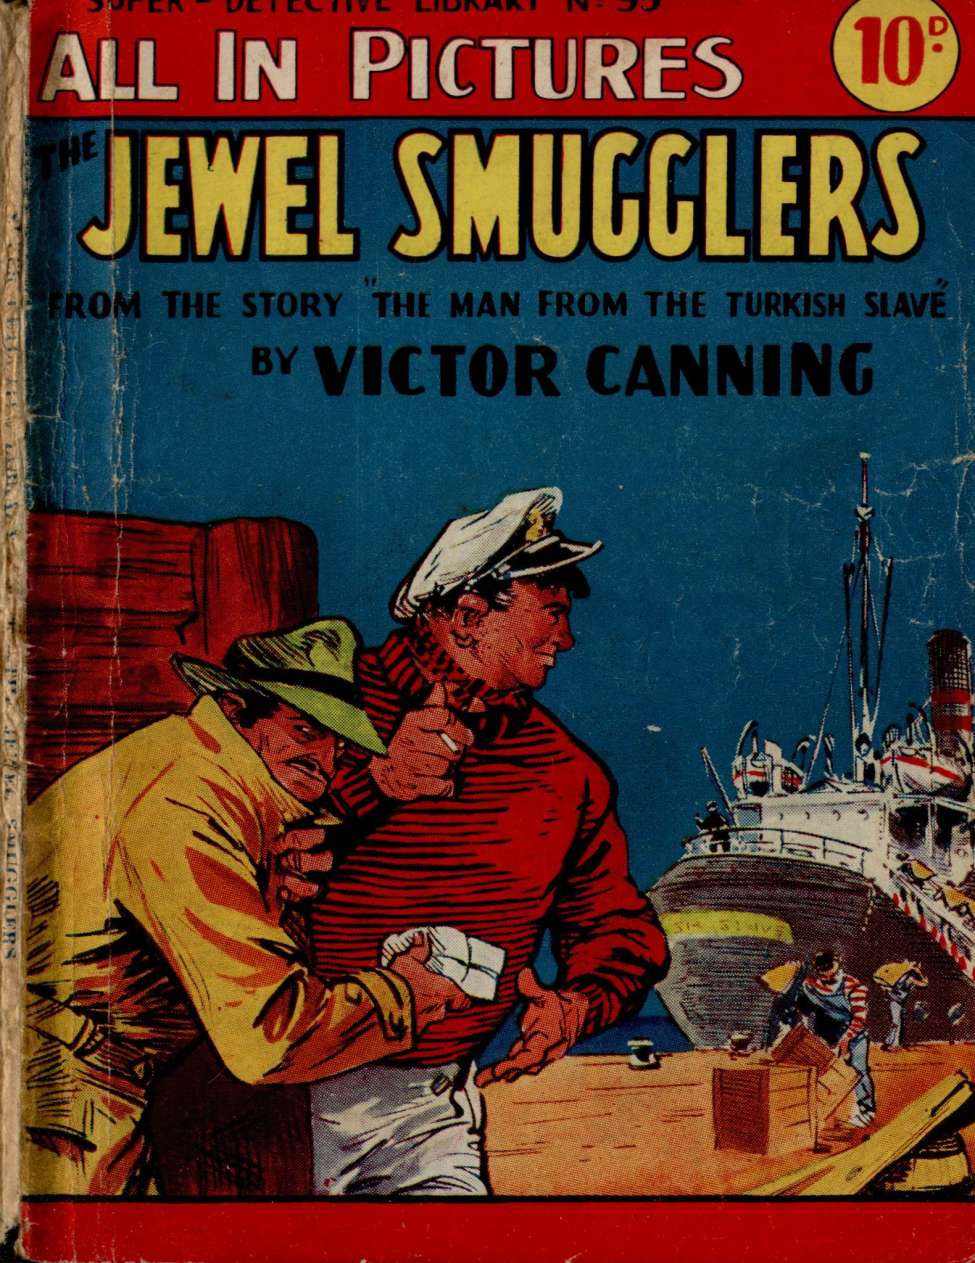 Comic Book Cover For Super Detective Library 95 - The Jewel Smugglers